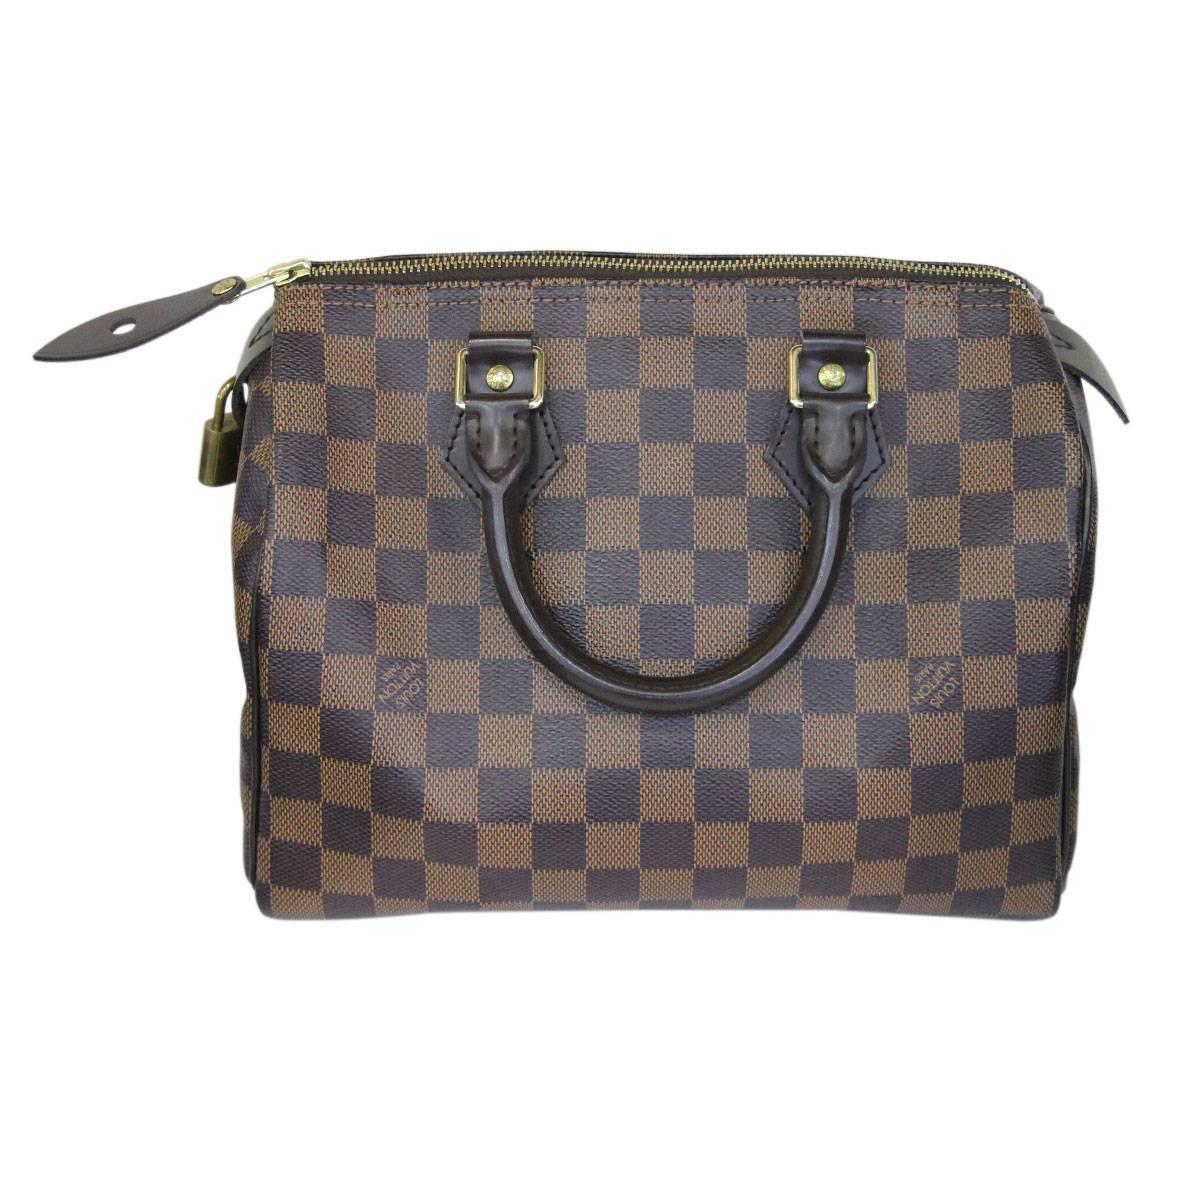 Company: Louis Vuitton
Handles: Dark Brown Leather Rolled Handles
Measurements: 9.8